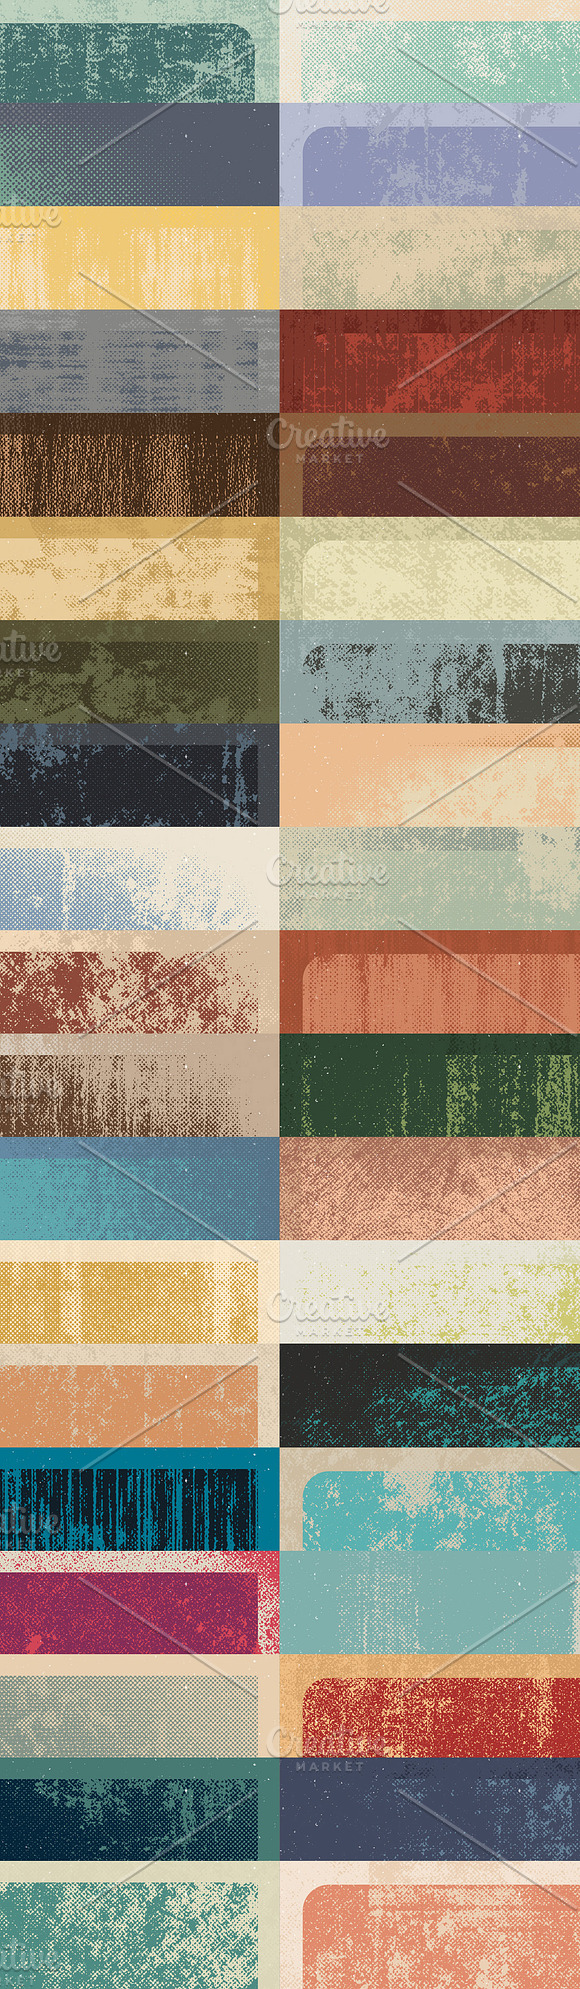 Vintage Halftone Texture/Backgrounds in Textures - product preview 3